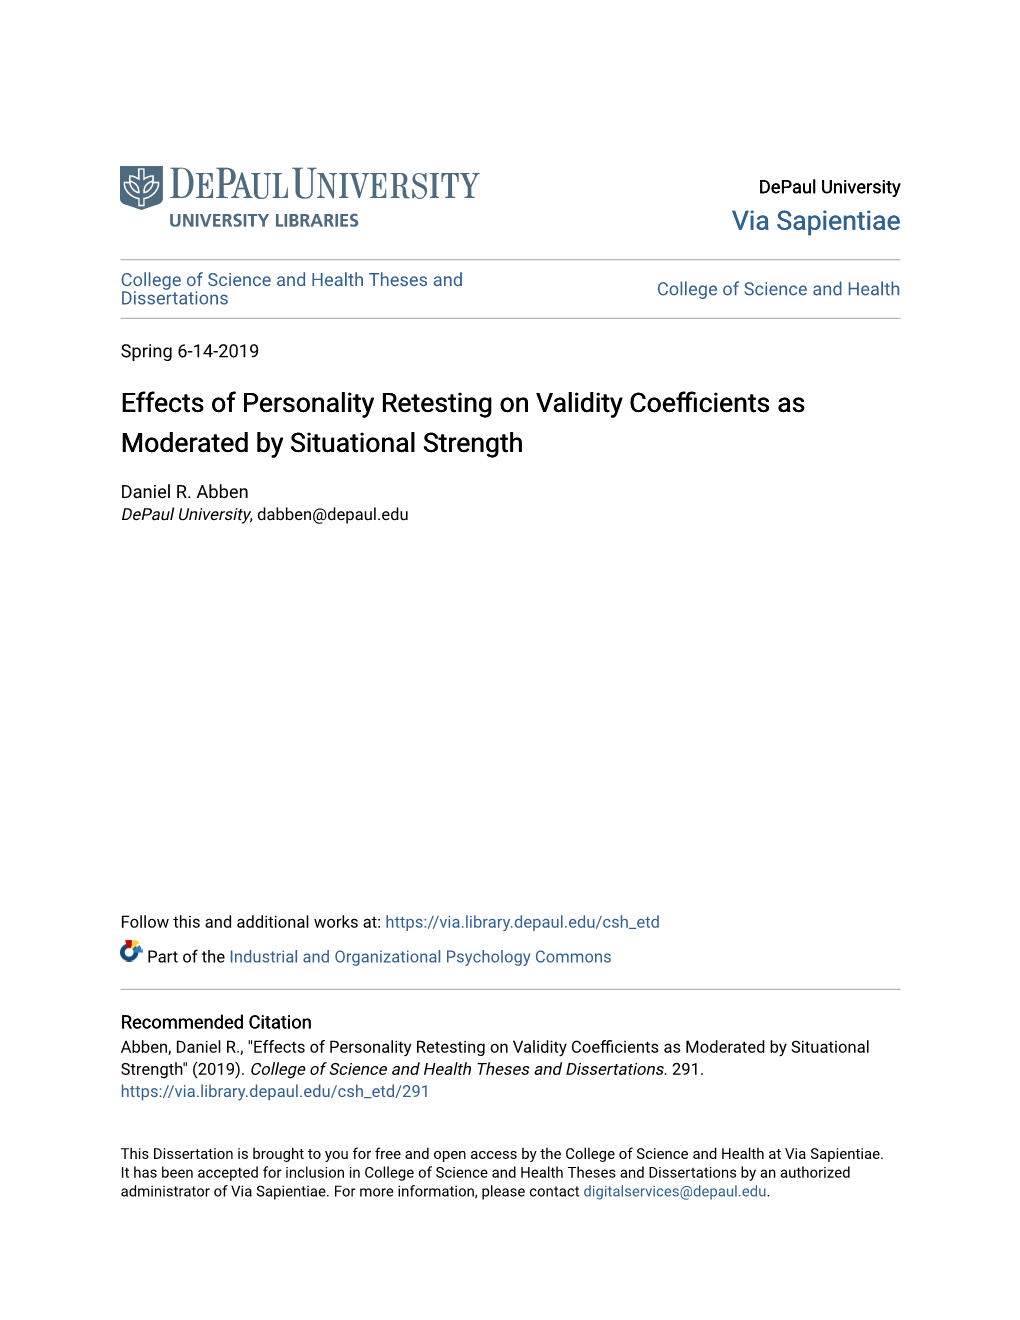 Effects of Personality Retesting on Validity Coefficients As Moderated by Situational Strength